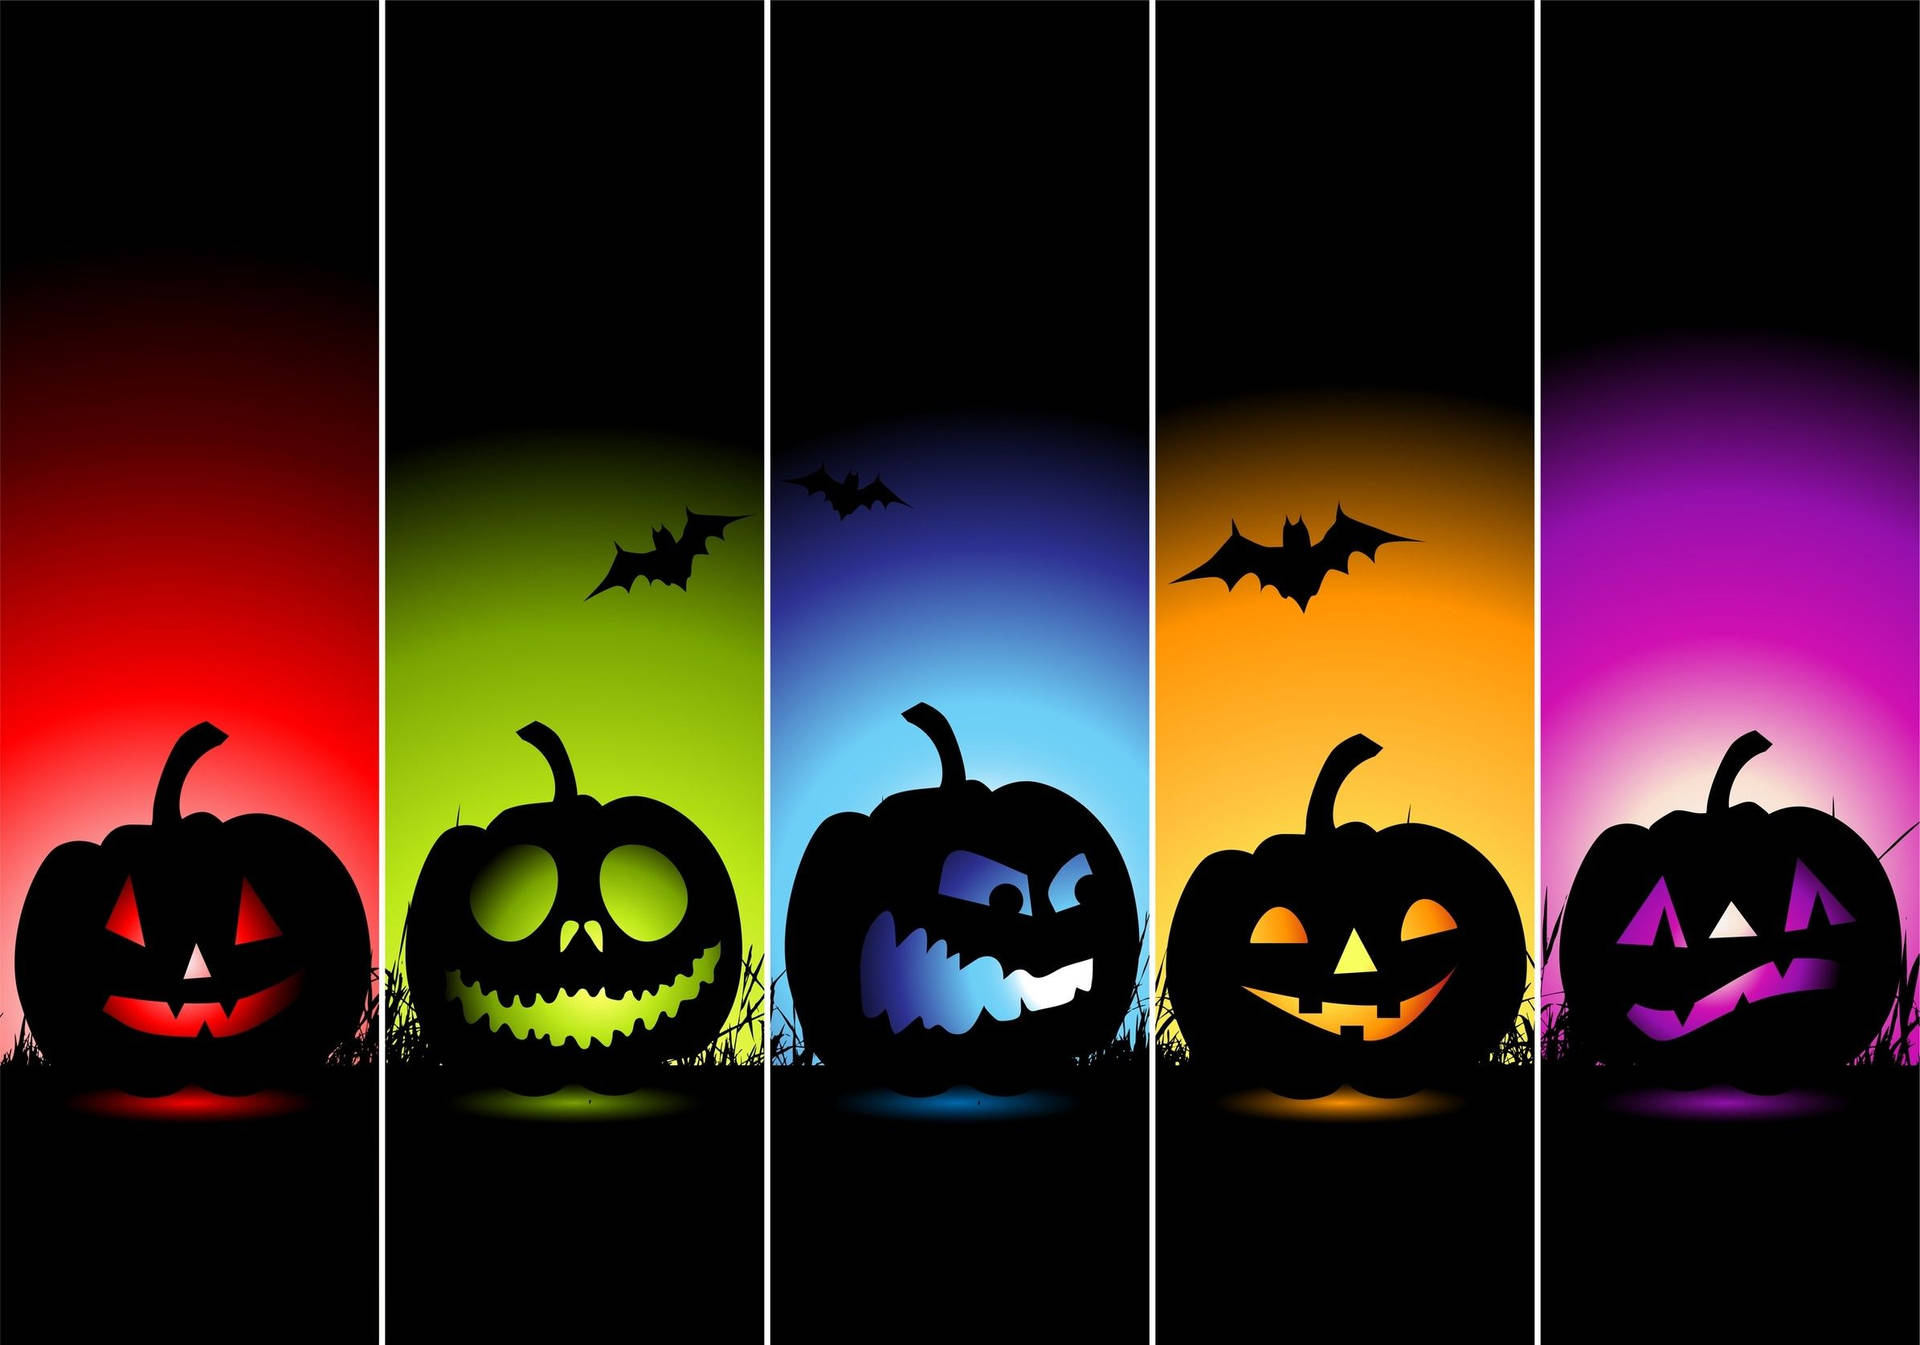 Experience the spooky season with this incredible Halloween iPad Wallpaper